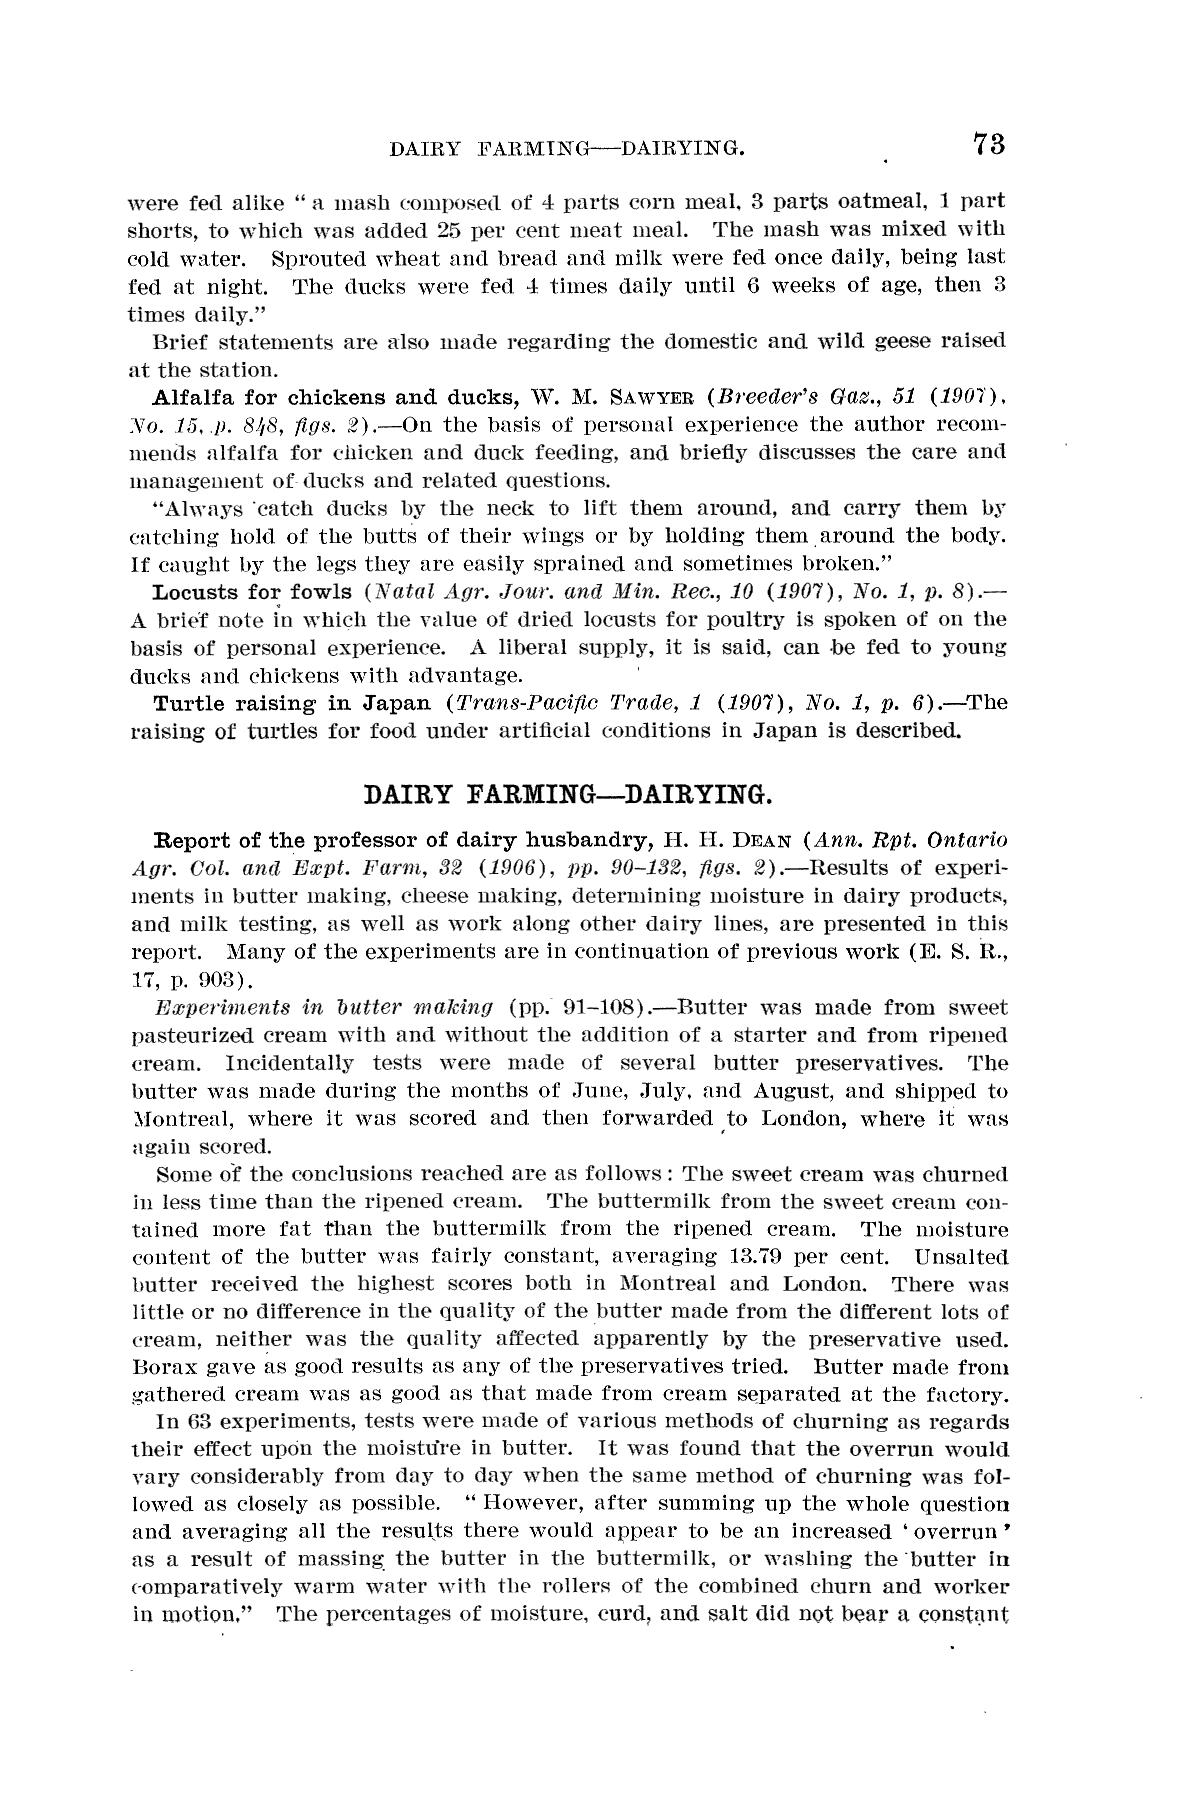 Experiment Station Record, Volume 19, 1907-1908
                                                
                                                    73
                                                